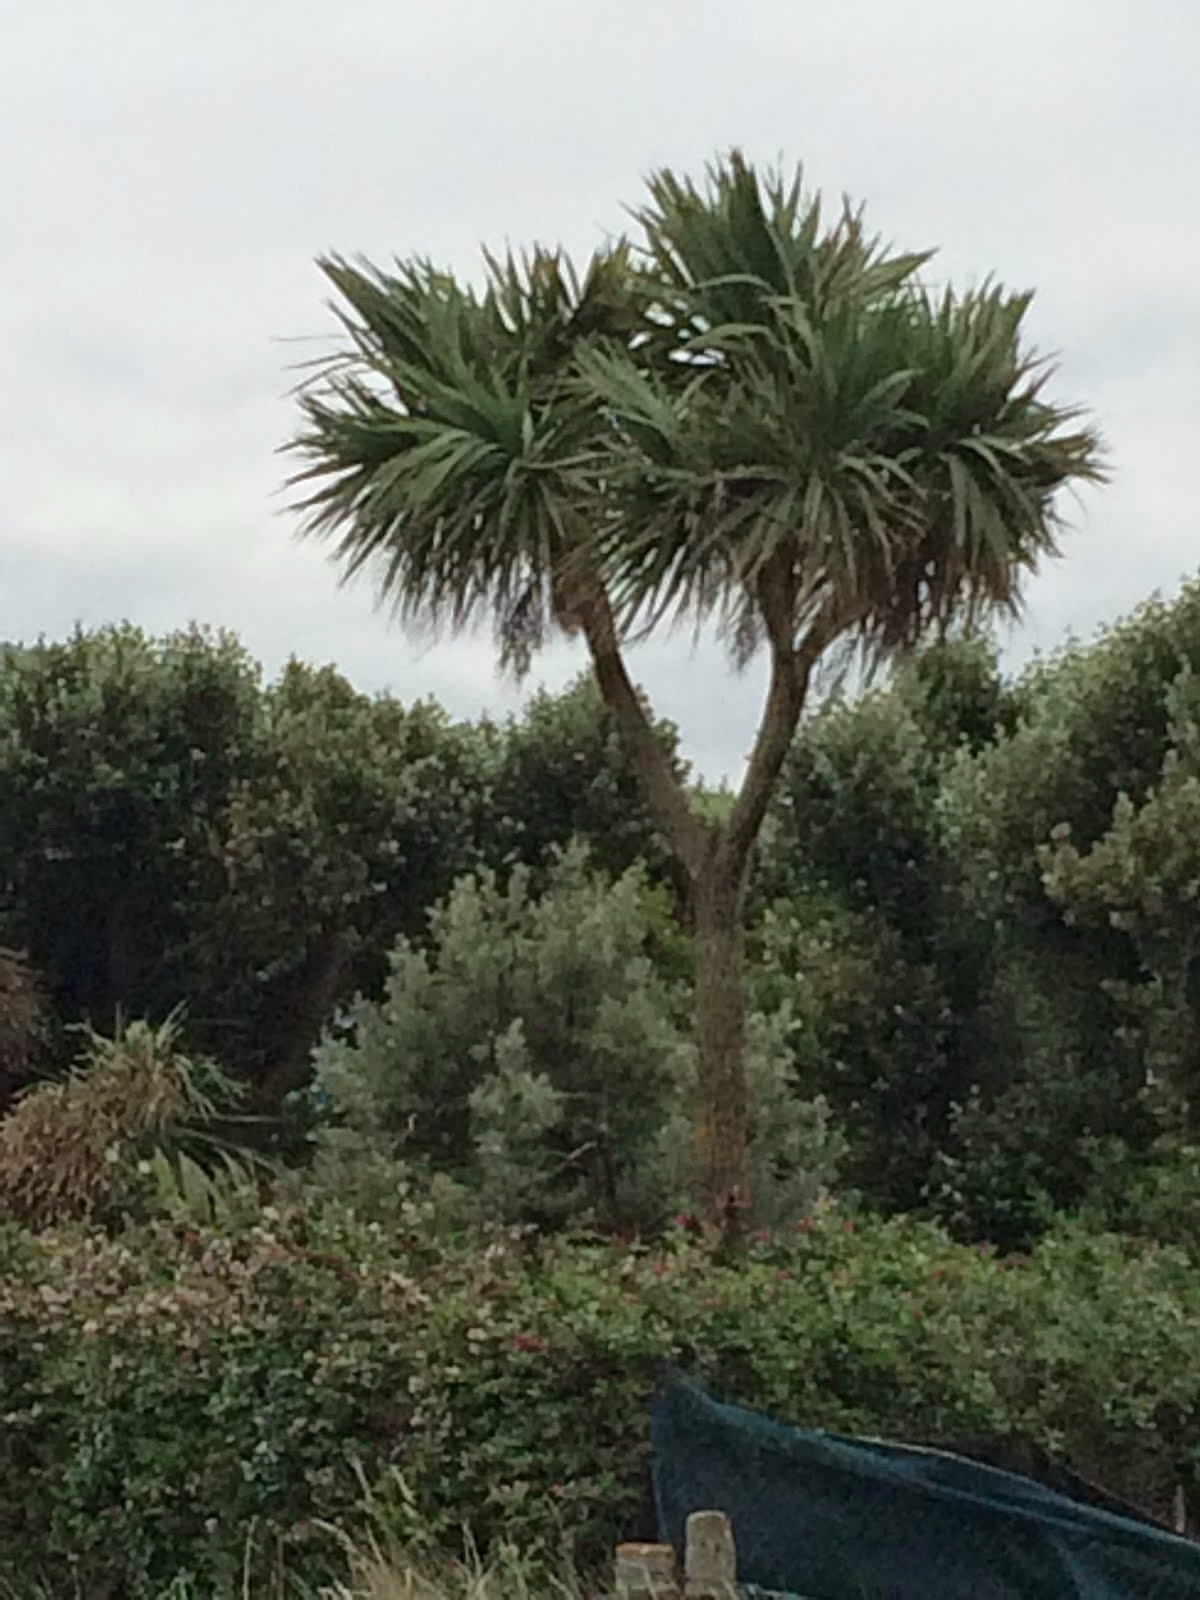 Palm trees in Ireland?!?